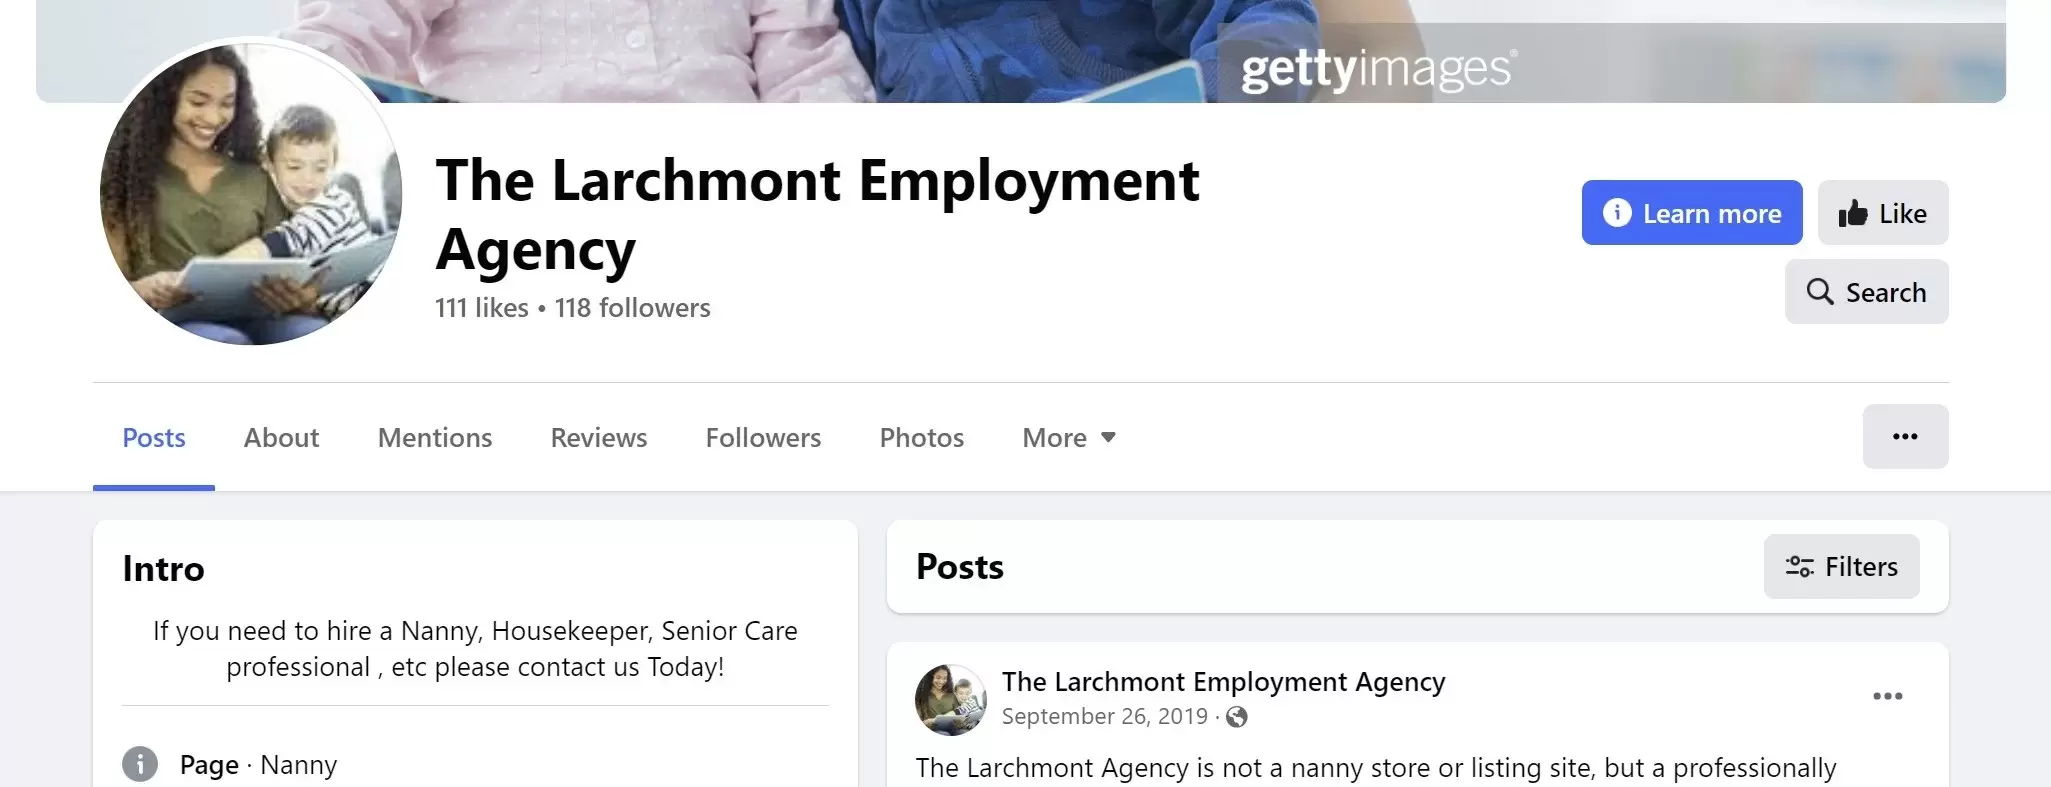 The Larchmont Employment Agency on Facebook